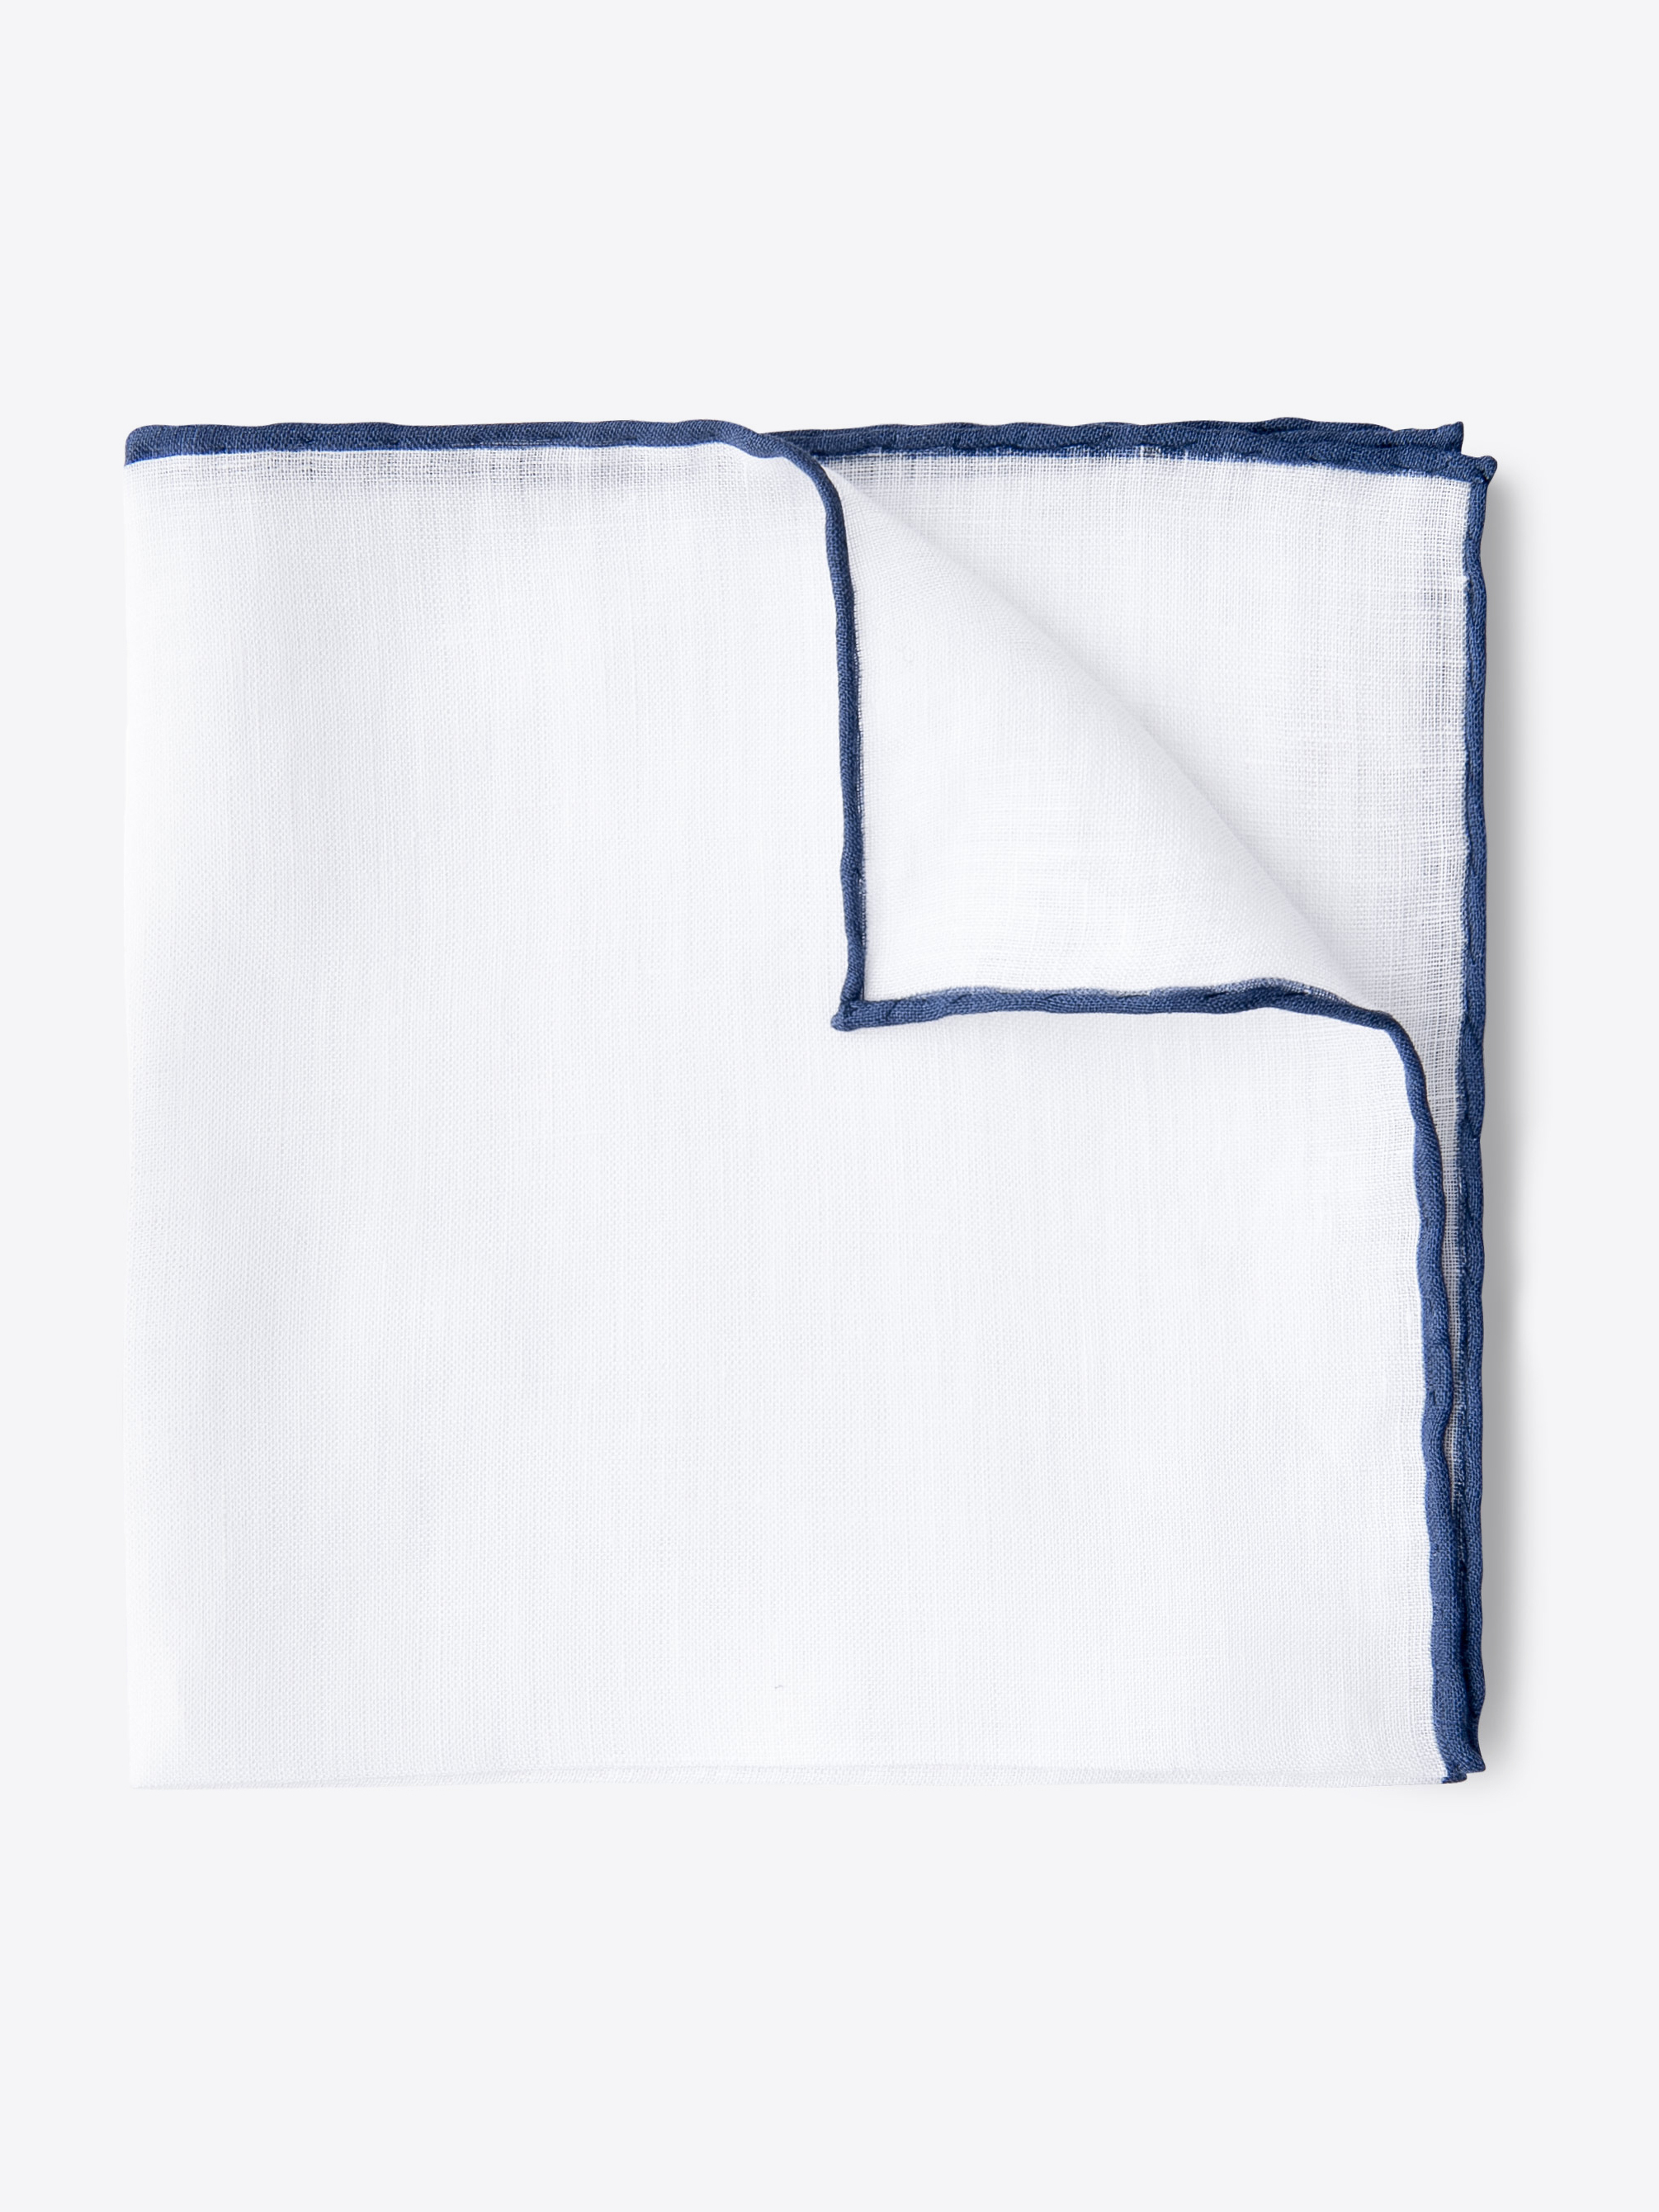 Zoom Image of White with Navy Tipping Linen Pocket Square